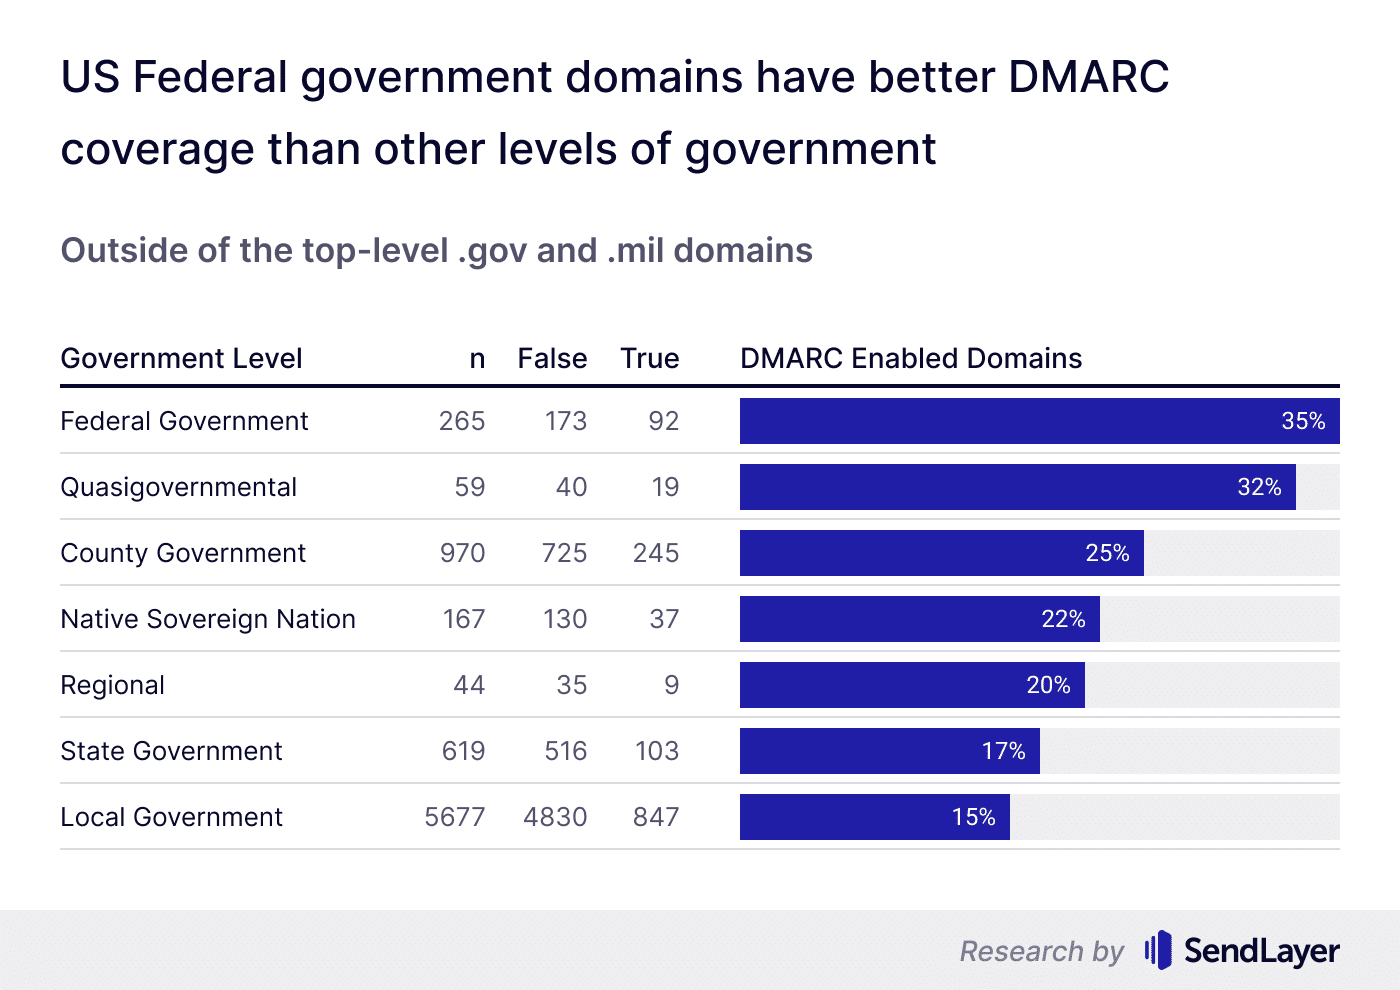 DMARC coverage of US agencies outside of .gov and .mil domains